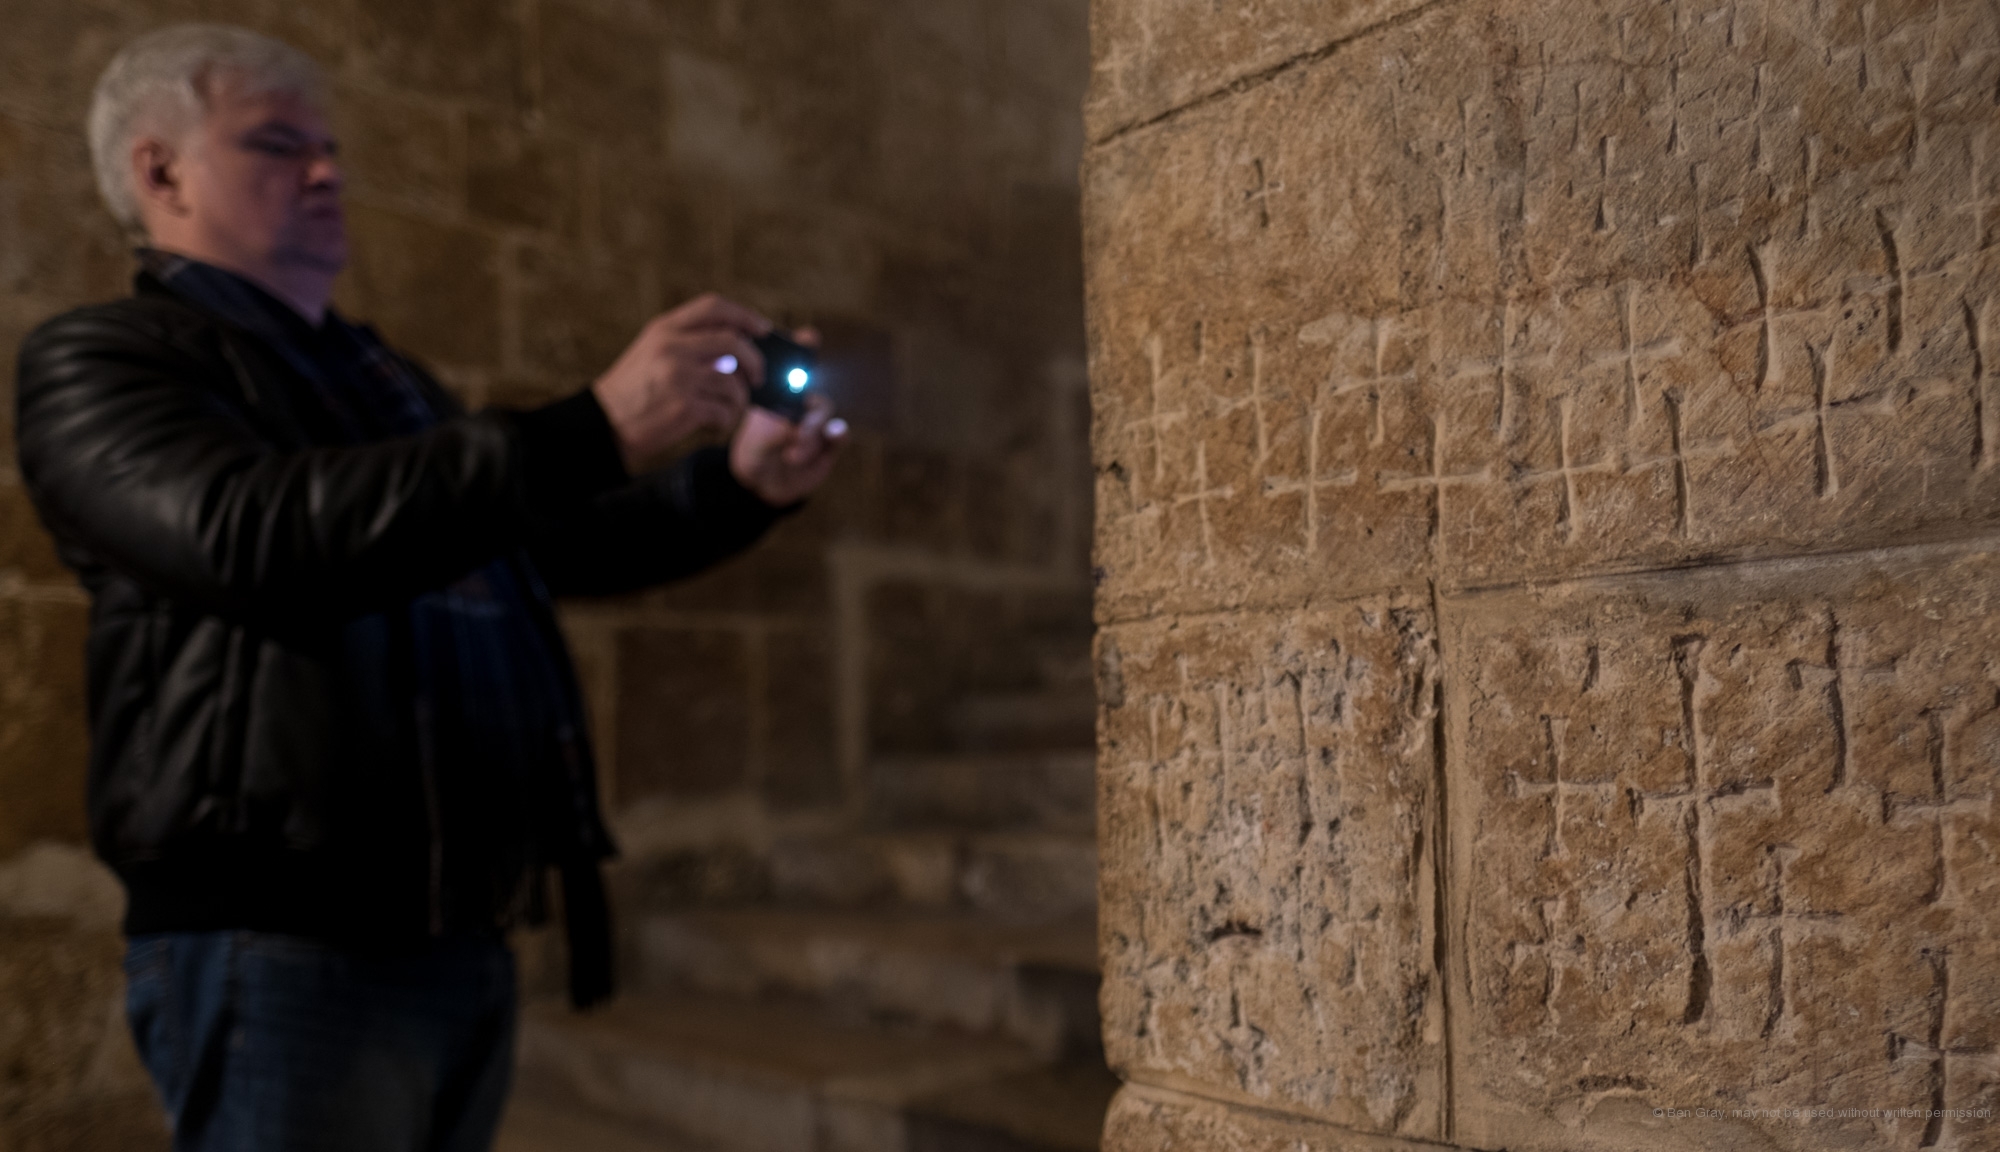 A man takes photos of the Crusader-era crosses carved into the stones of the church.